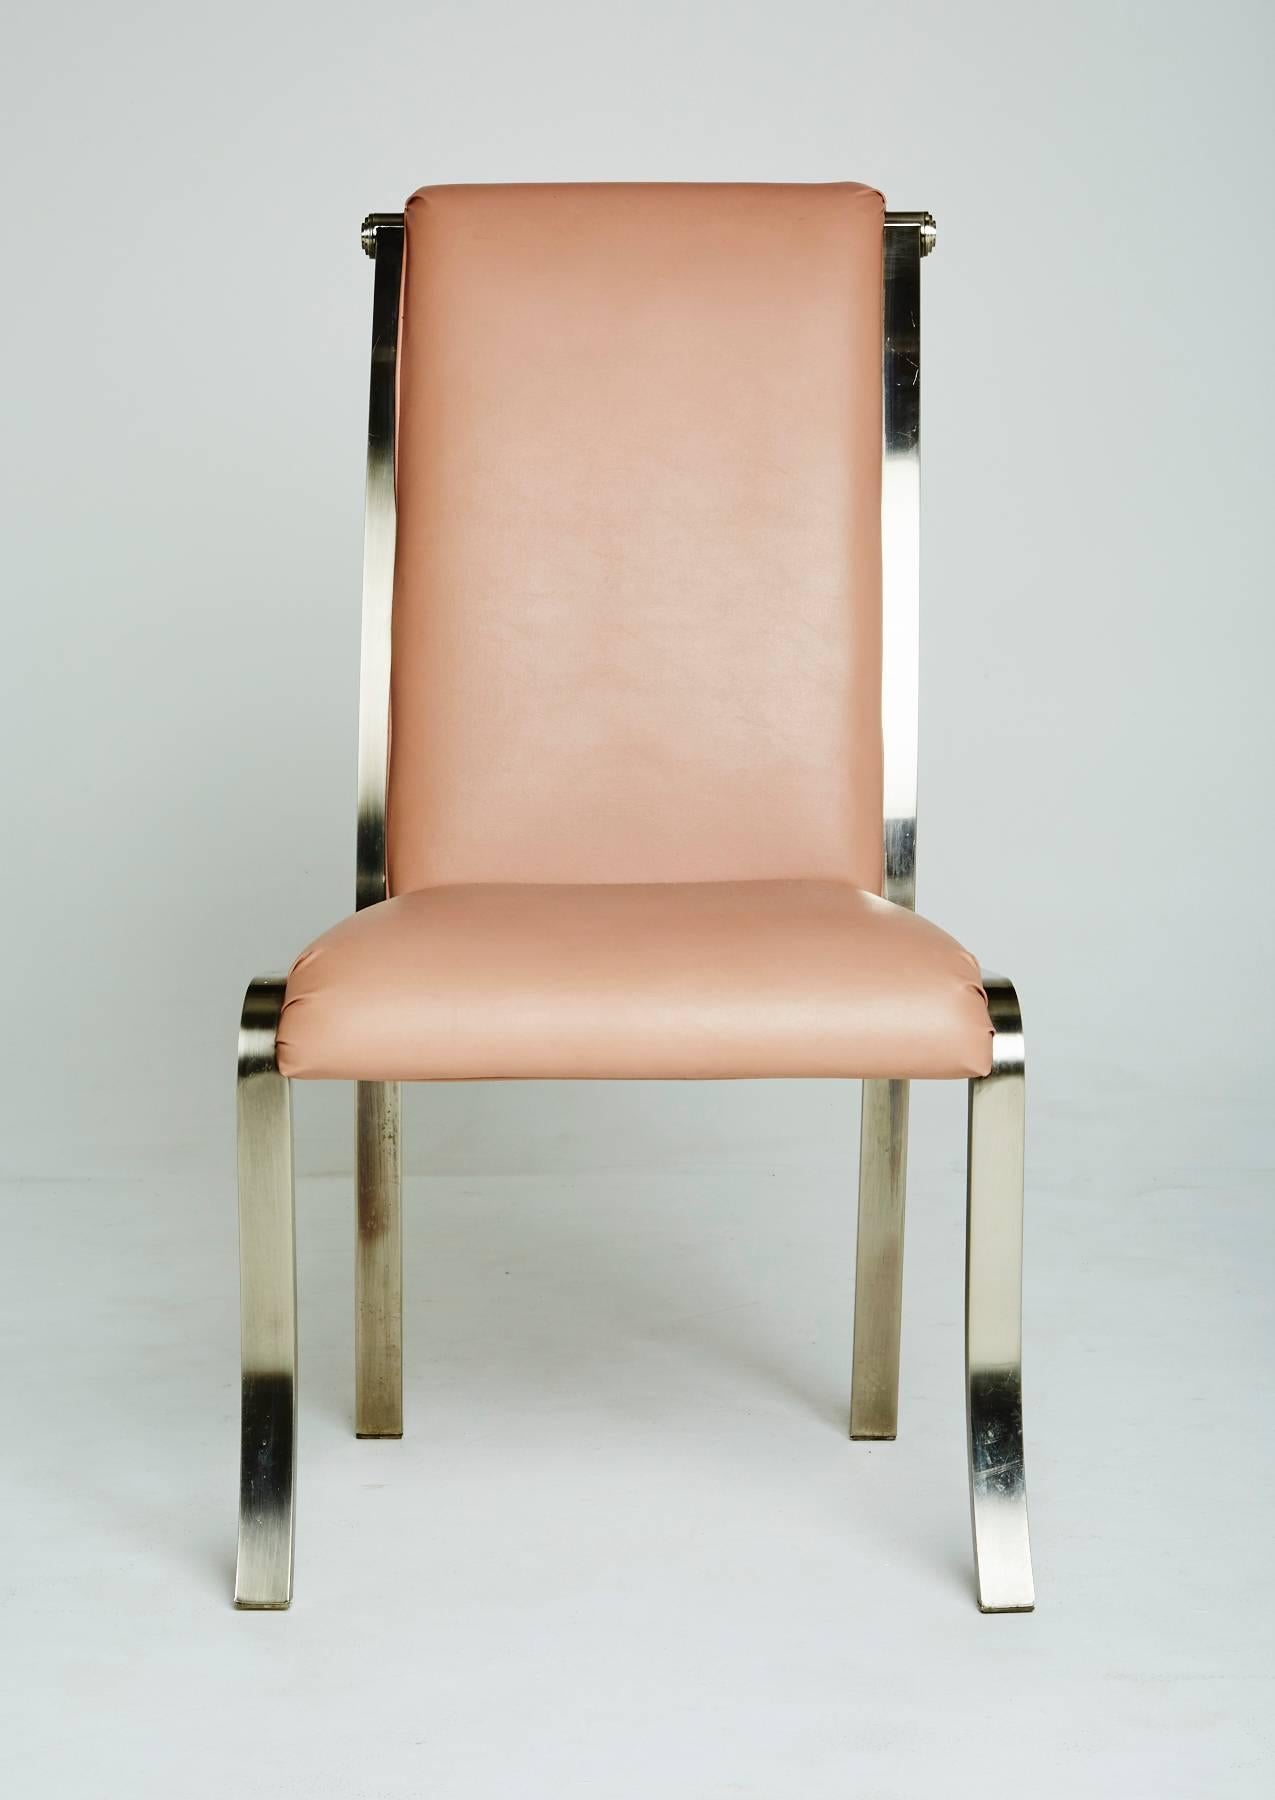 Created by the Design Institute of America, this set of dining chairs consists of two armchairs and four side chairs, all chairs are marked with DIA labels underneath the original upholstery. 

Each chrome frame has a slight, elegant curve to its